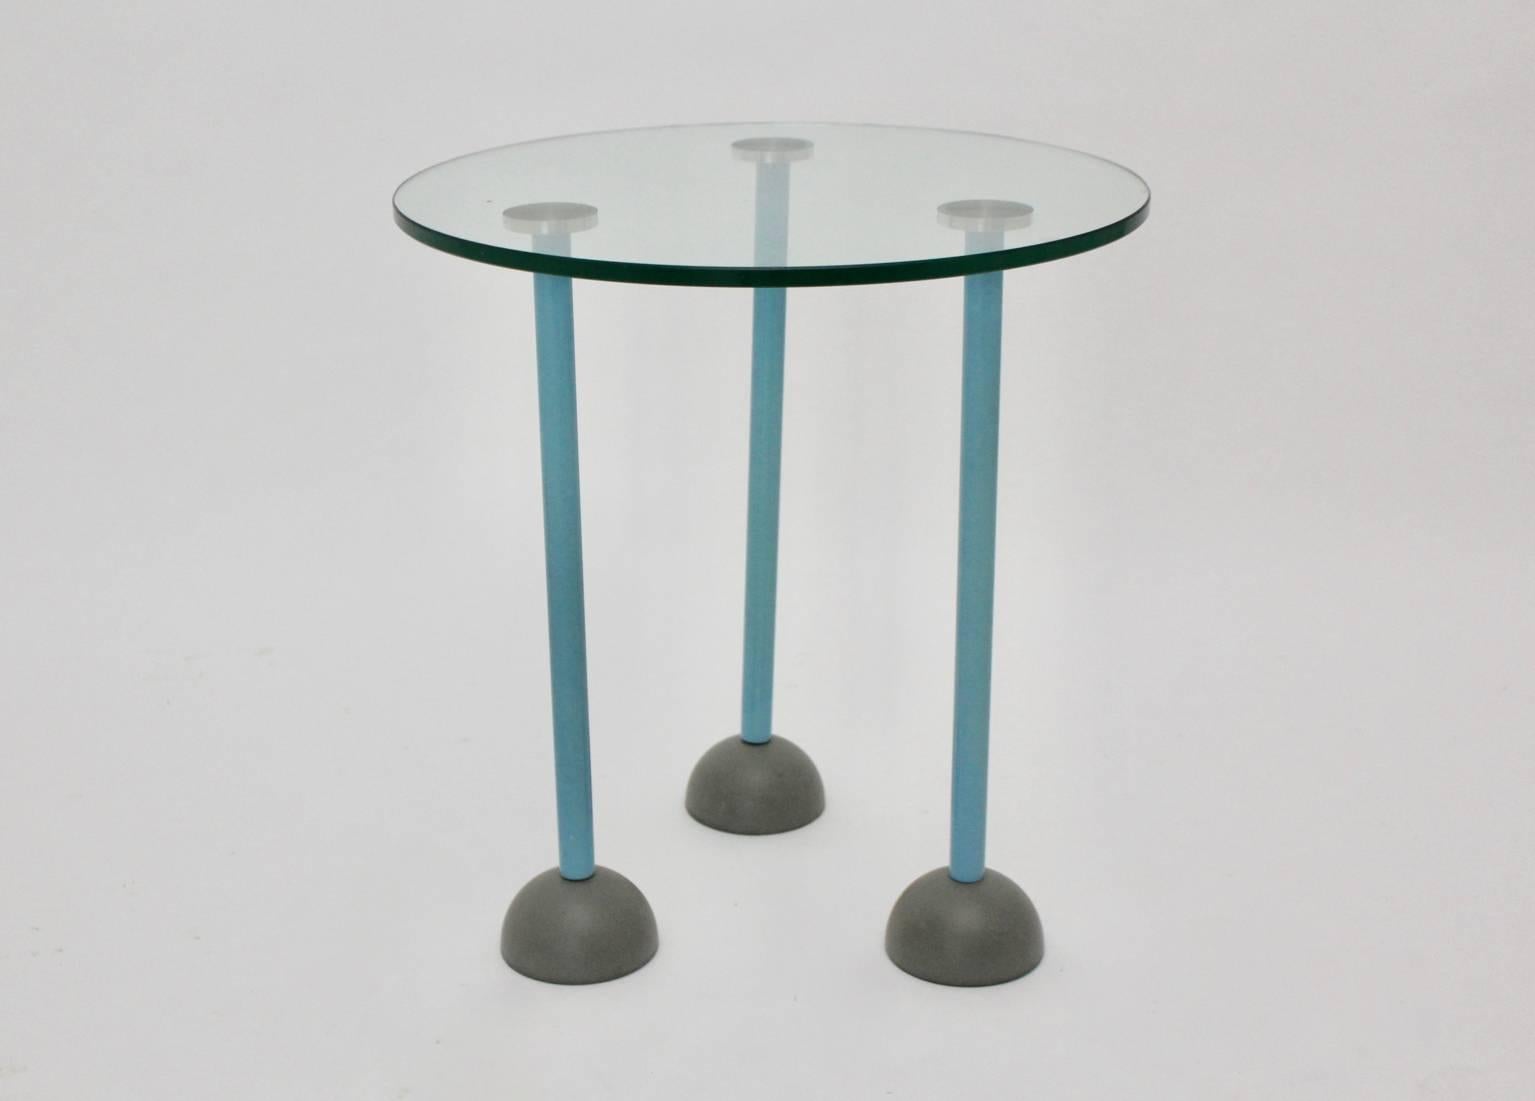 This presented three-legged modernist vintage side table was designed by Ettore Sottsass attributed 1985, Italy.
This side table has three legs in the color turquoise. Each of the feet feature a plastic cup and a wheel.
The feet are screwed in metal